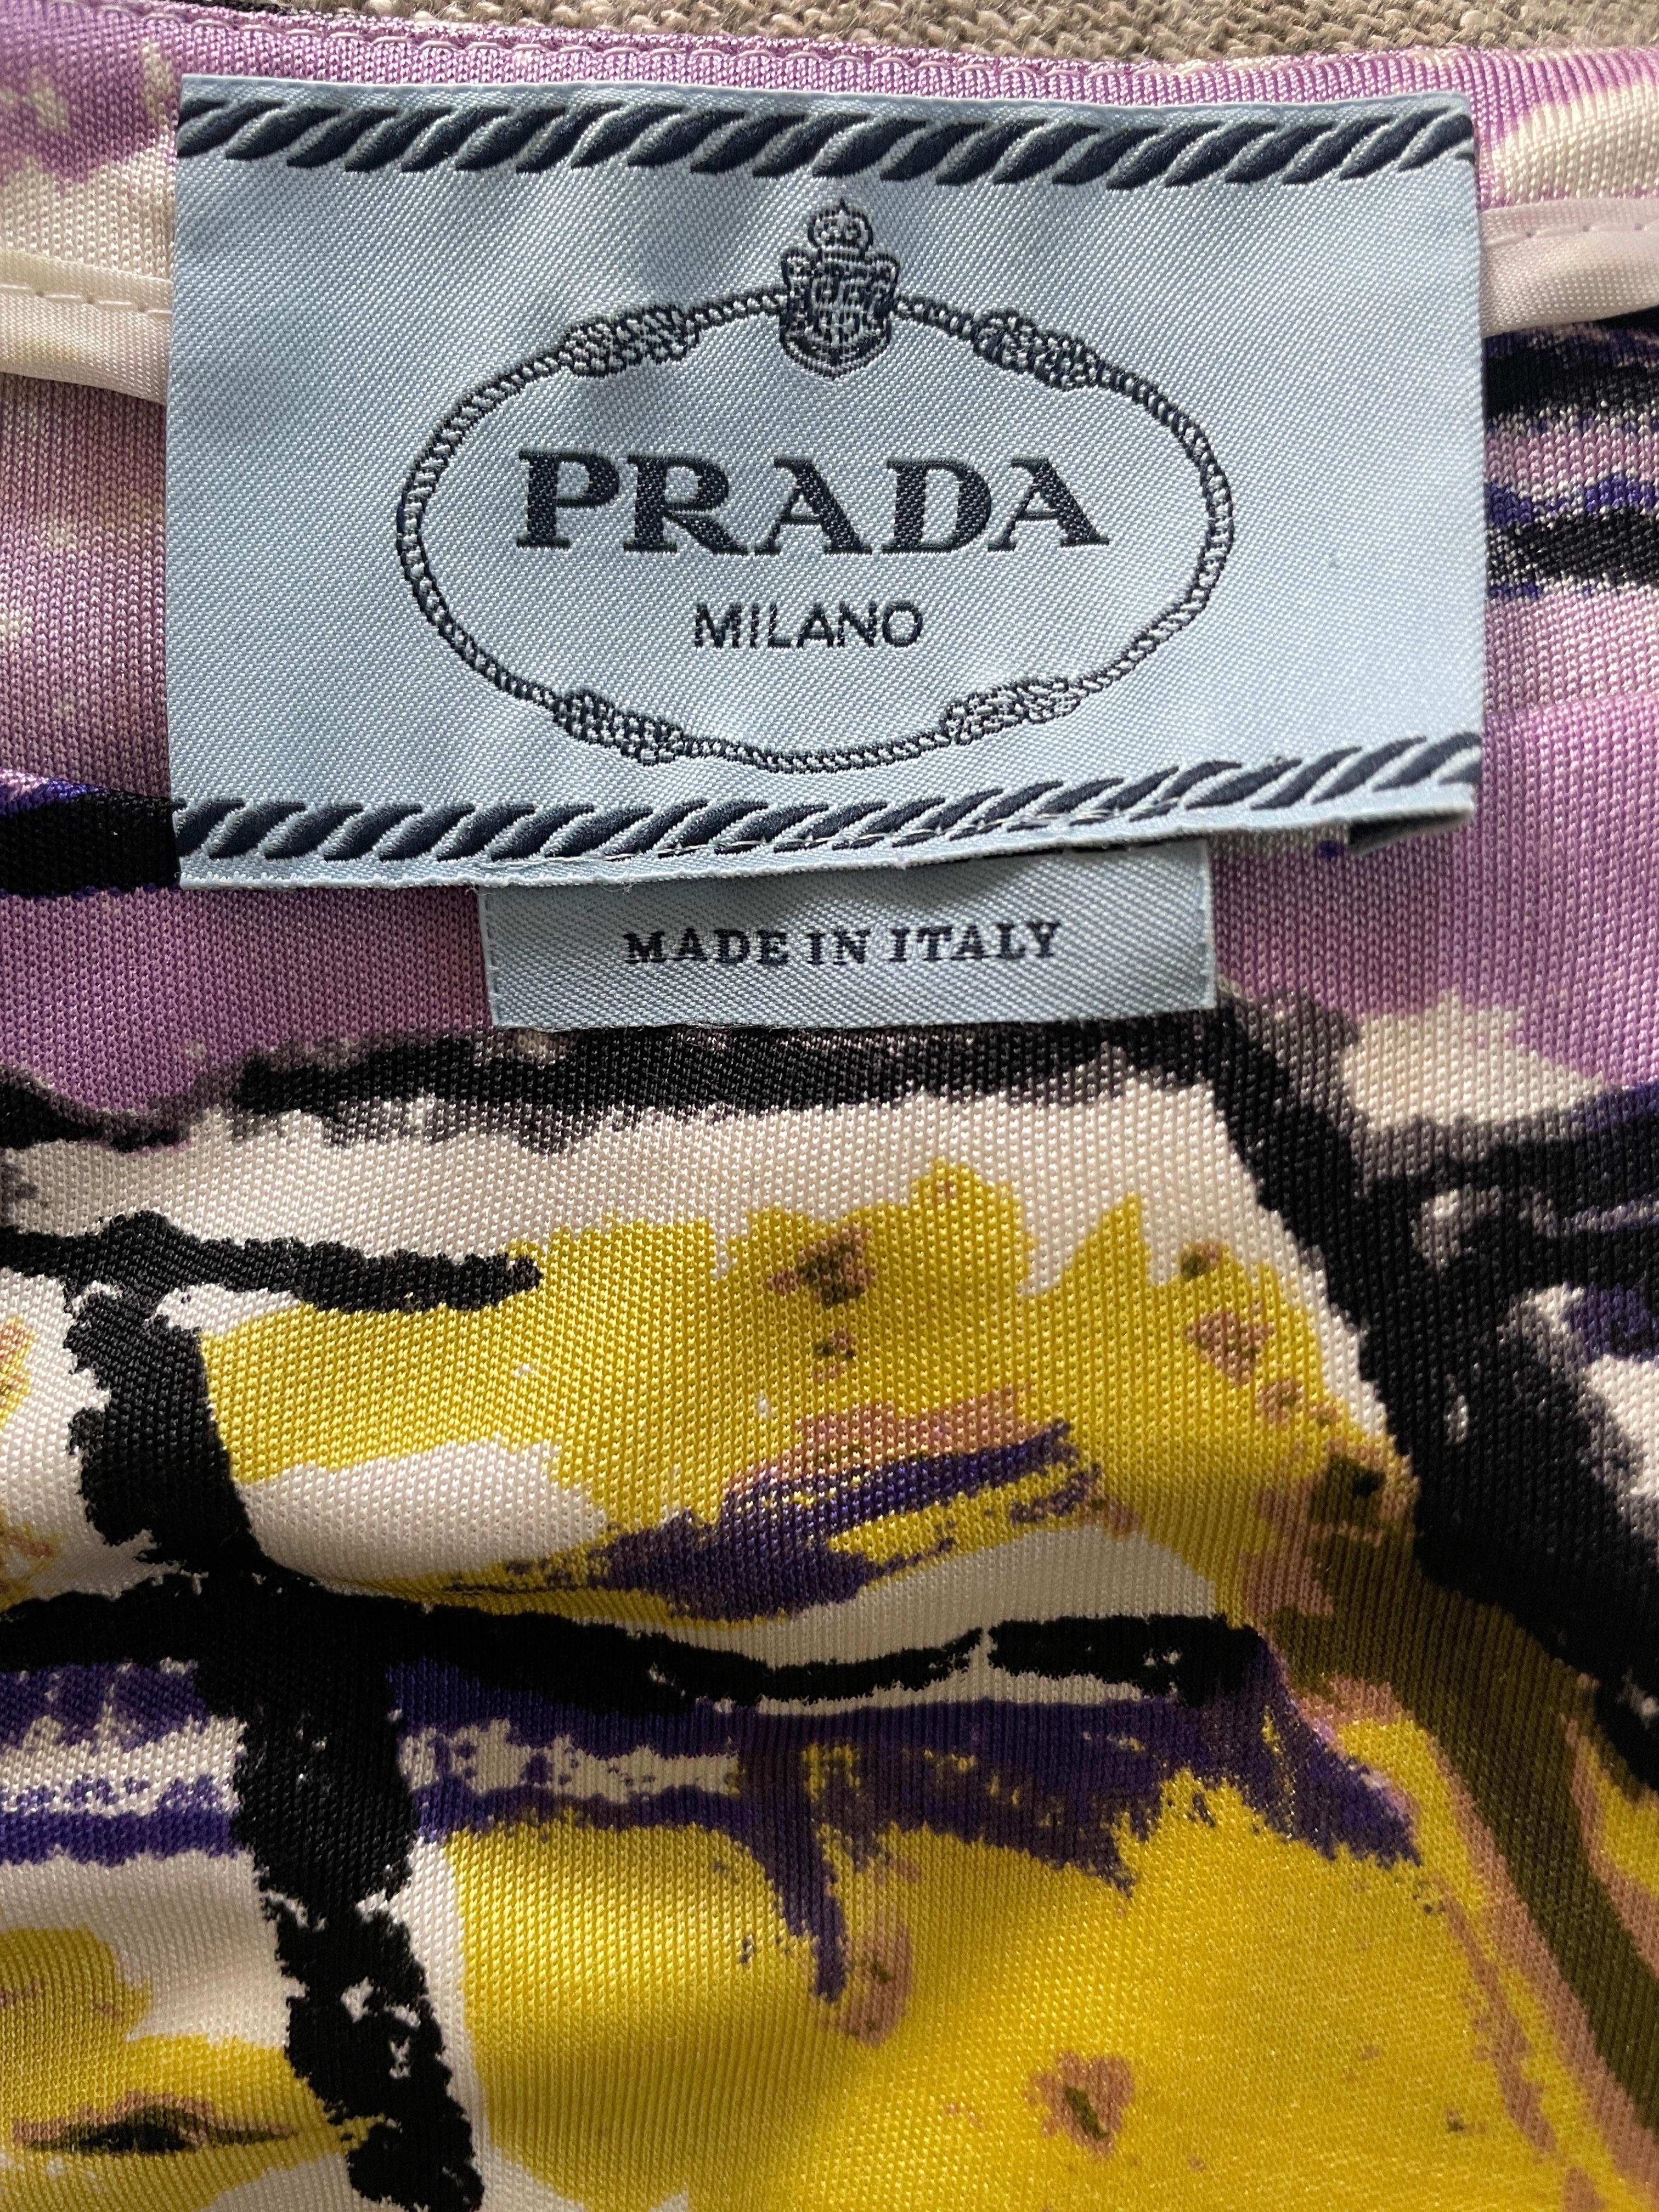 Prada Archive Print Venice Postcard Jersey Dress with Belt.
This is so pretty.
Size 42
 Bust 36